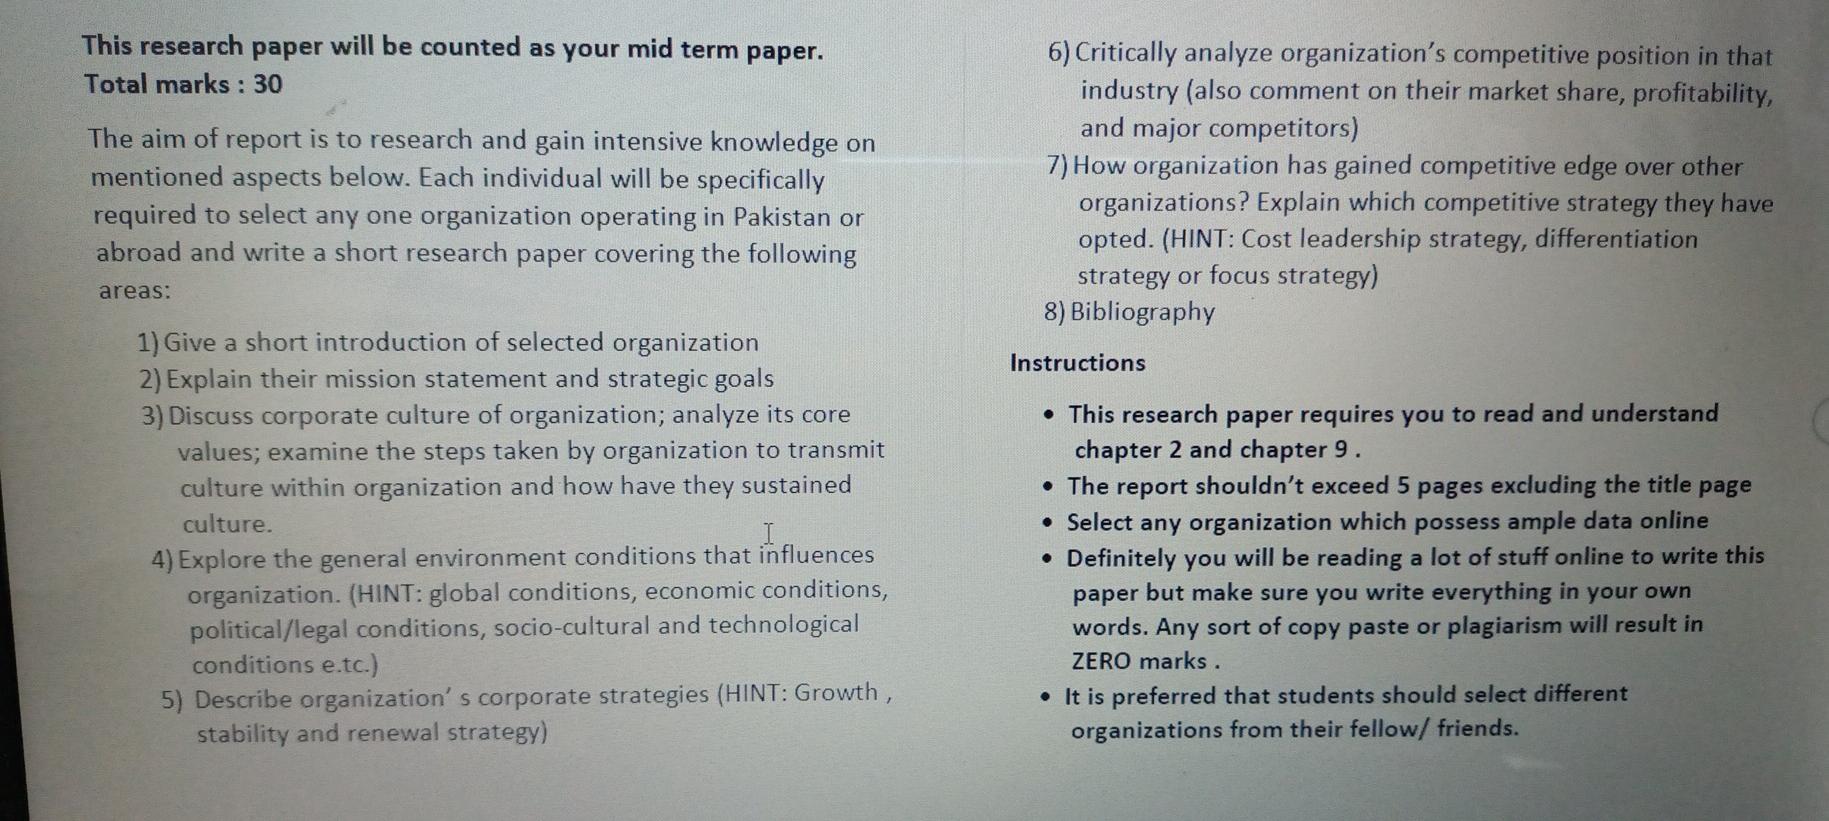 aim of research paper